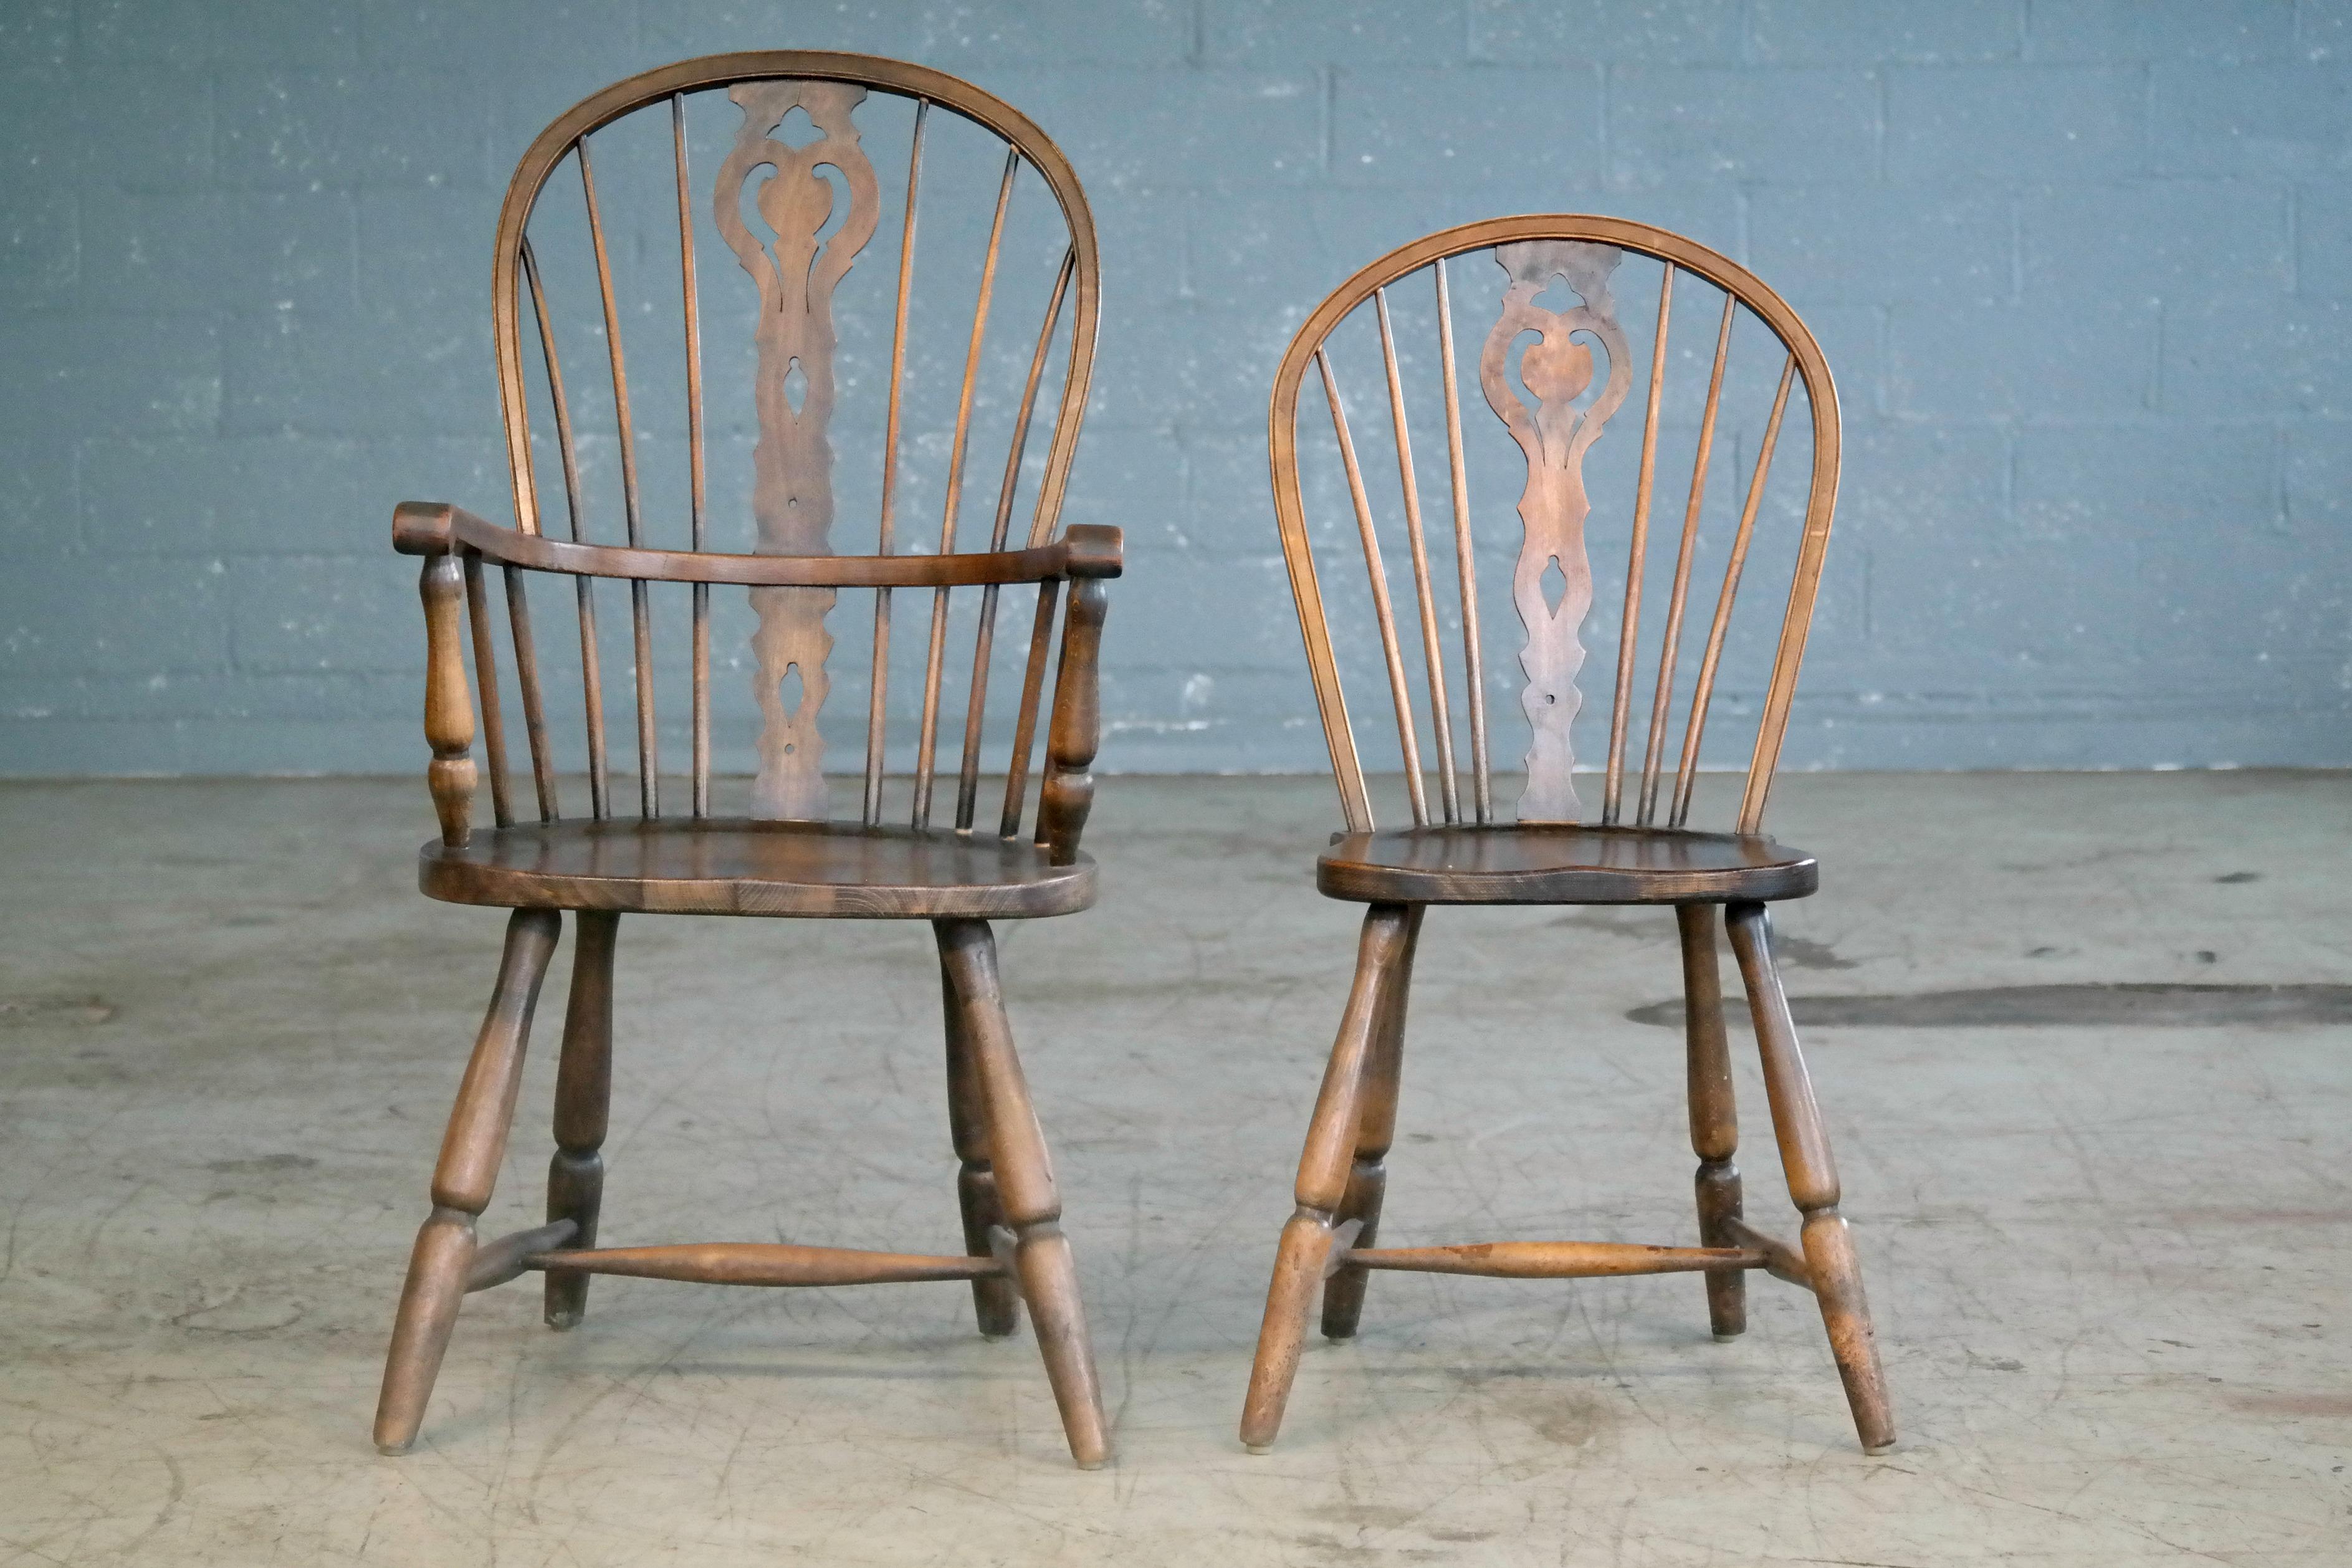 Great set of six Danish dining or kitchen chairs in traditional Windsor style with splat backs and saddle-style seating. Two captain's chairs with armrests and four side chairs. Made from dark stained beech wood sometime between 1930 and 1950 in